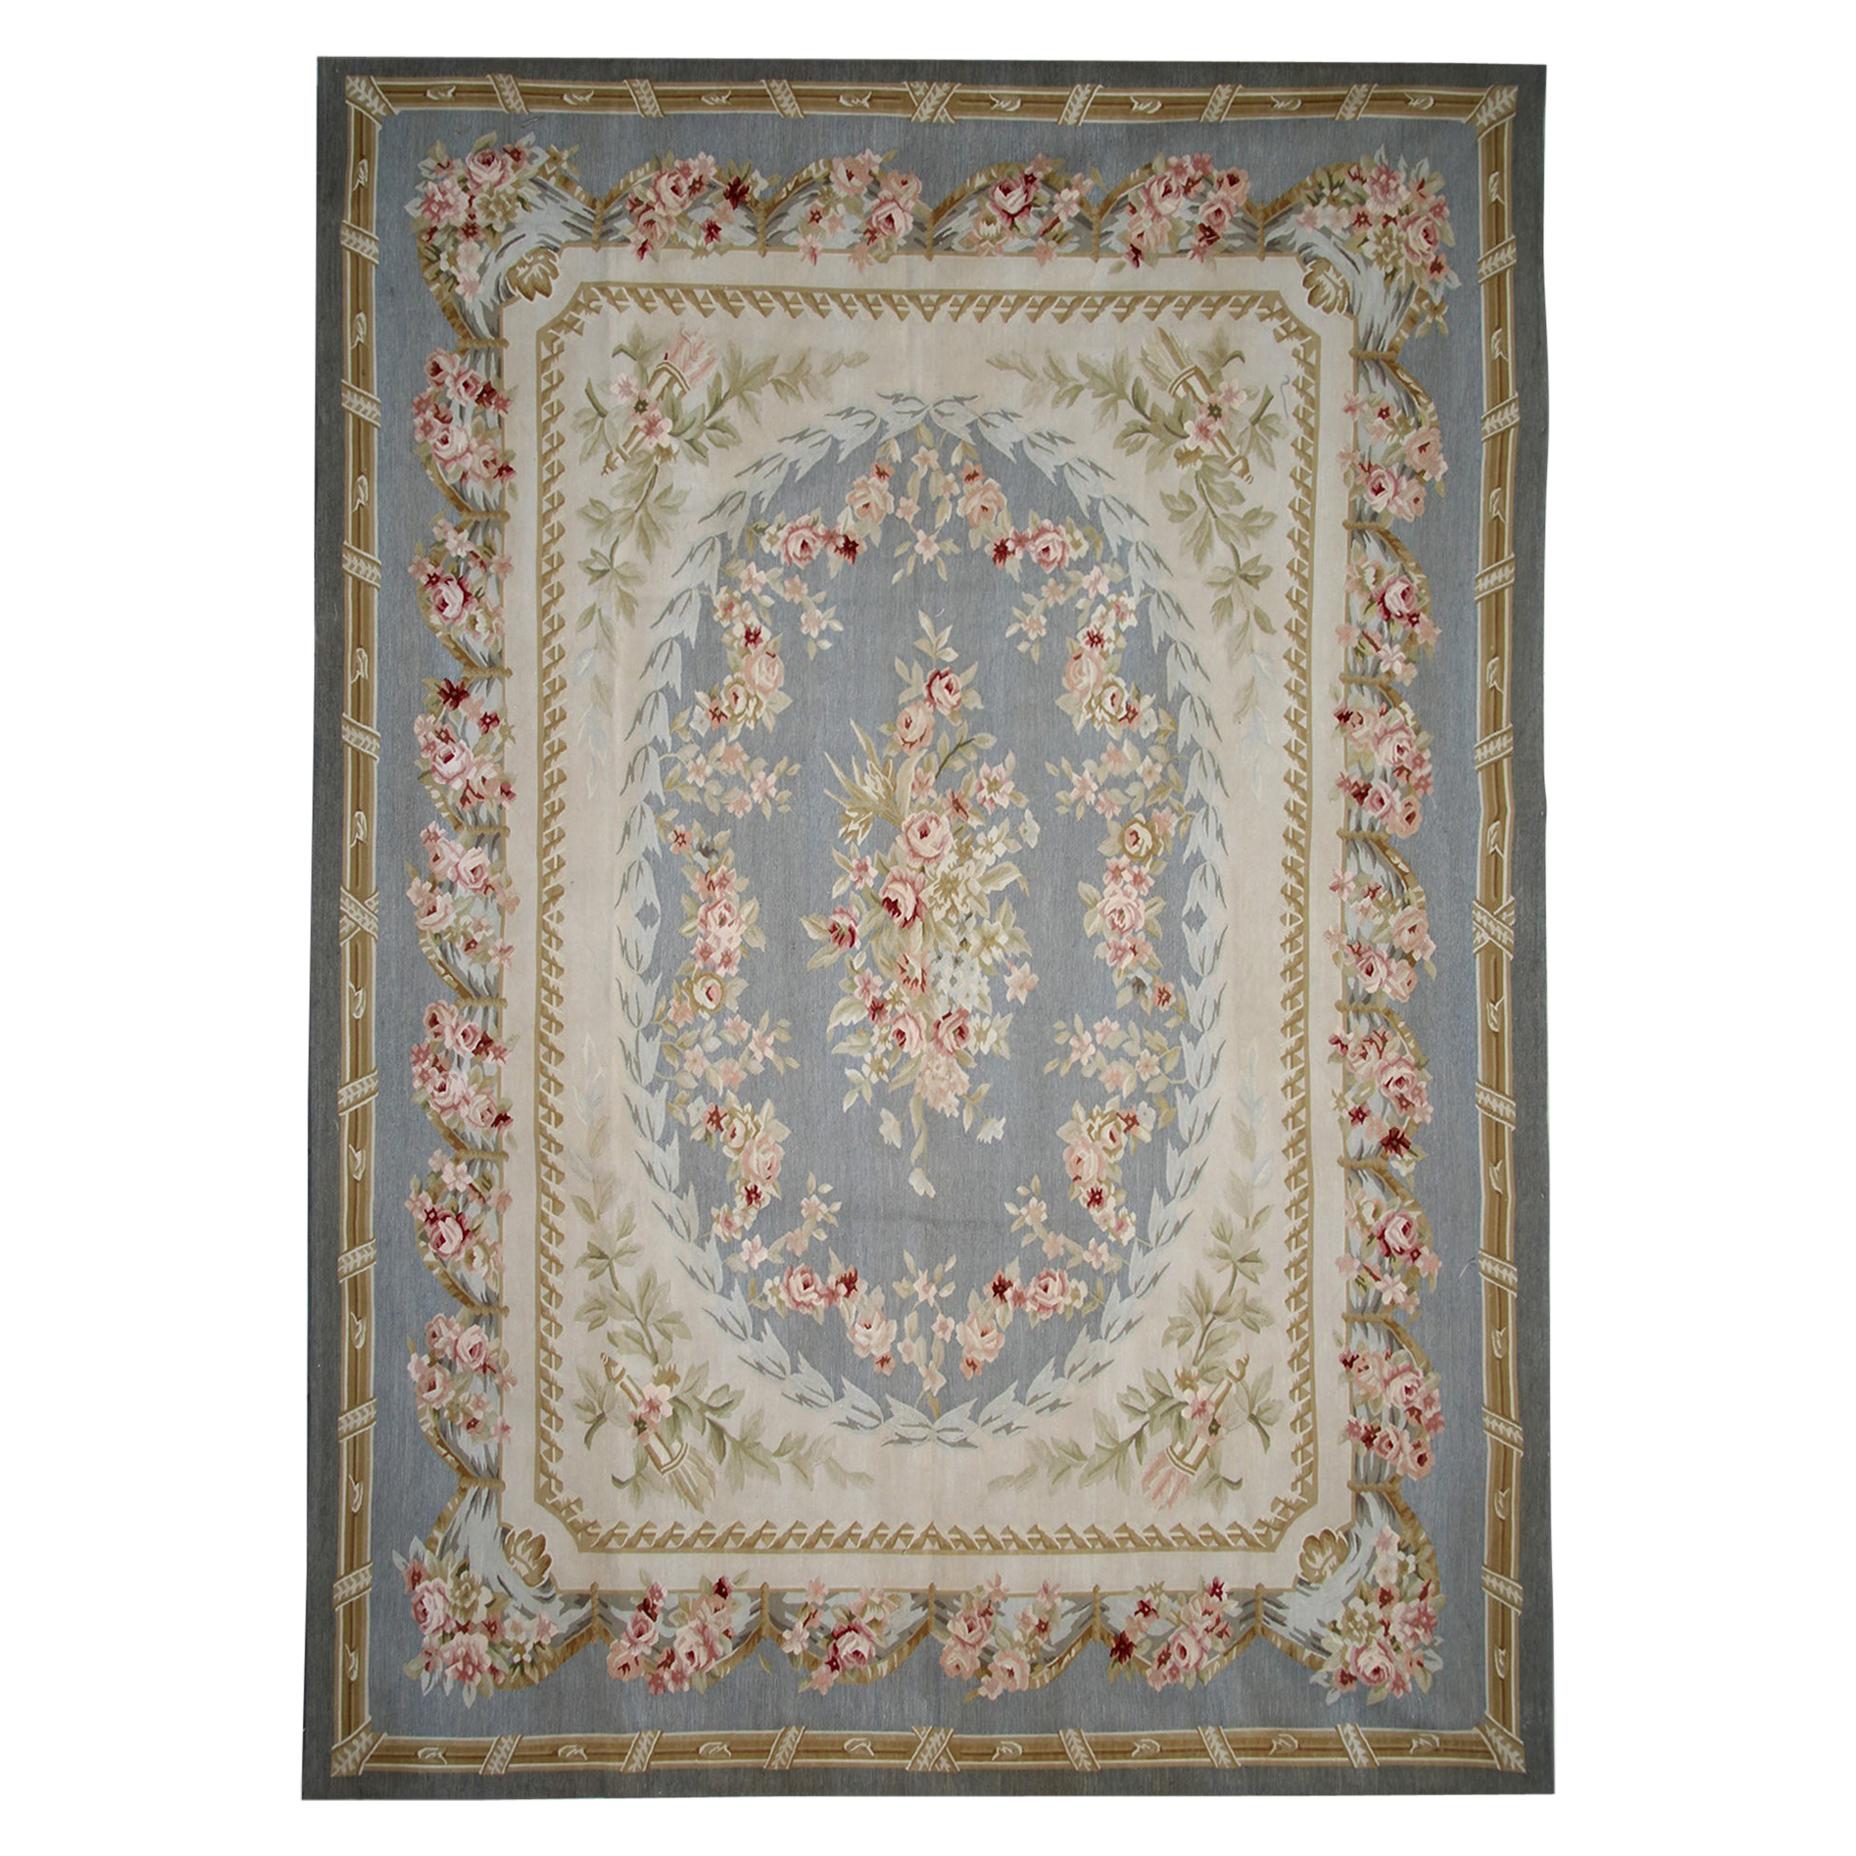 Vintage Aubusson Style Rug Tapestry, Blue Floral Needlepoint Country Home Decor